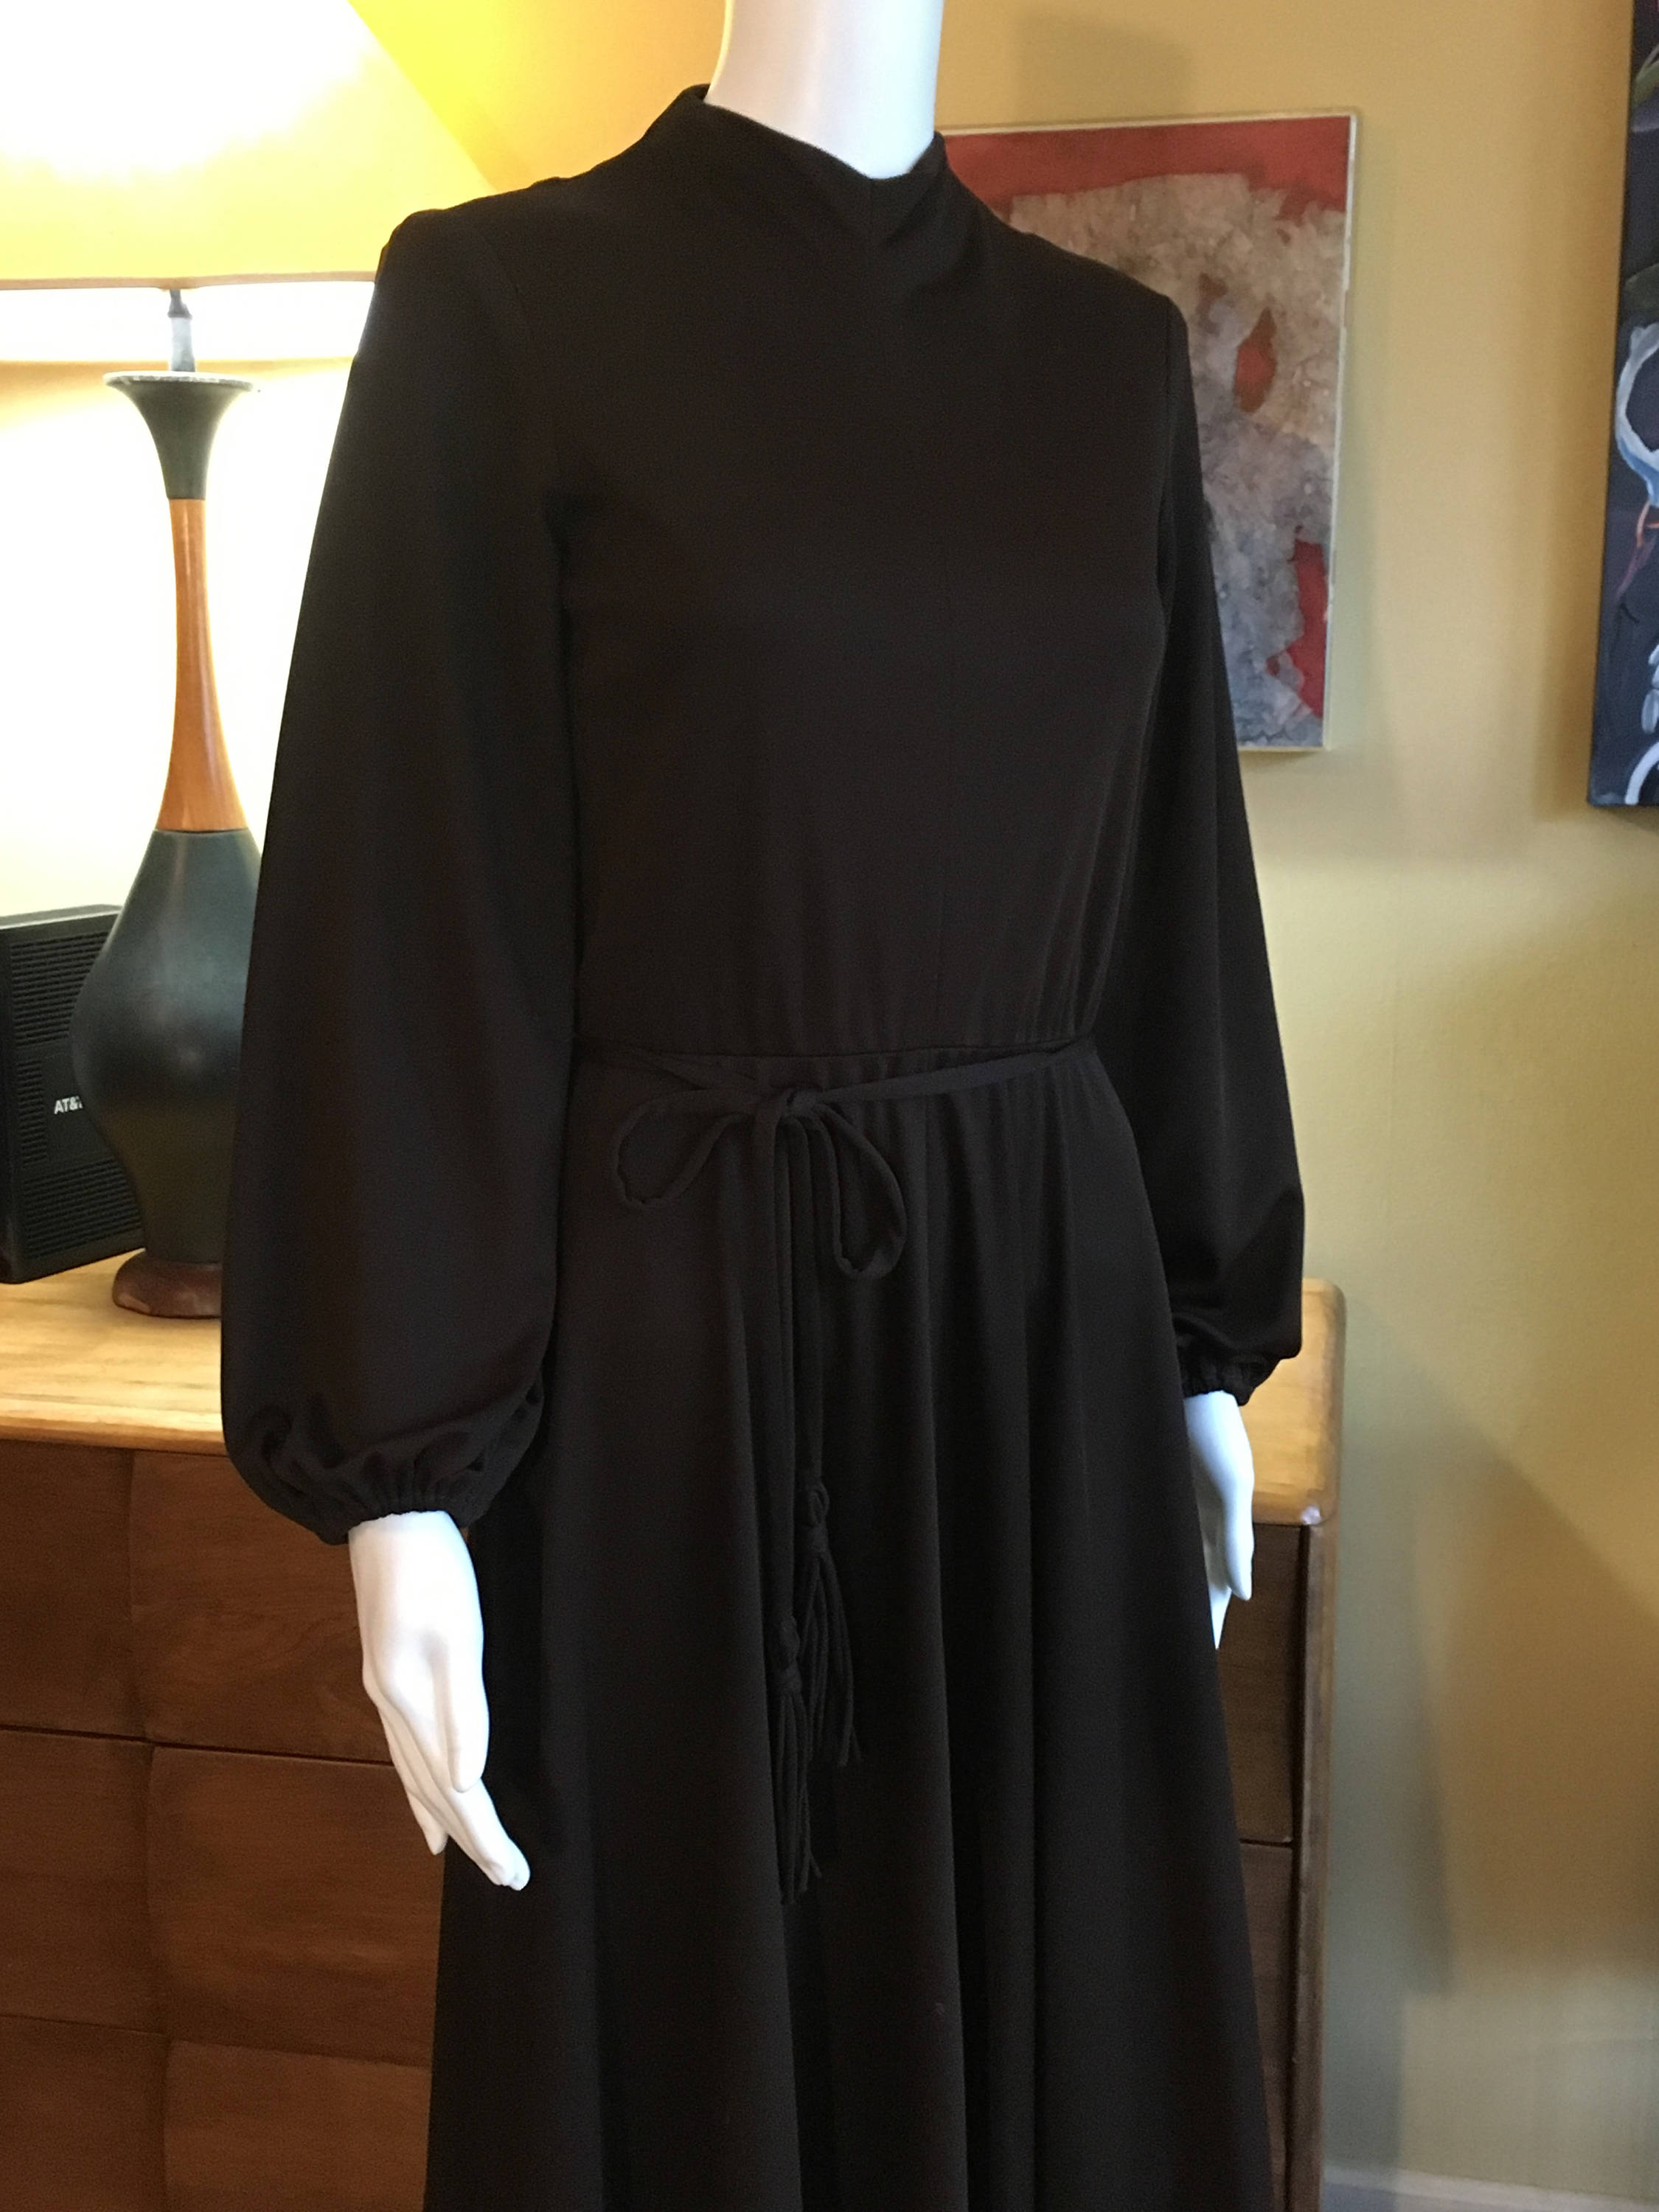 1970s Flirty Chic Nylon Dress in Chocolate Brown by Lilli | Etsy